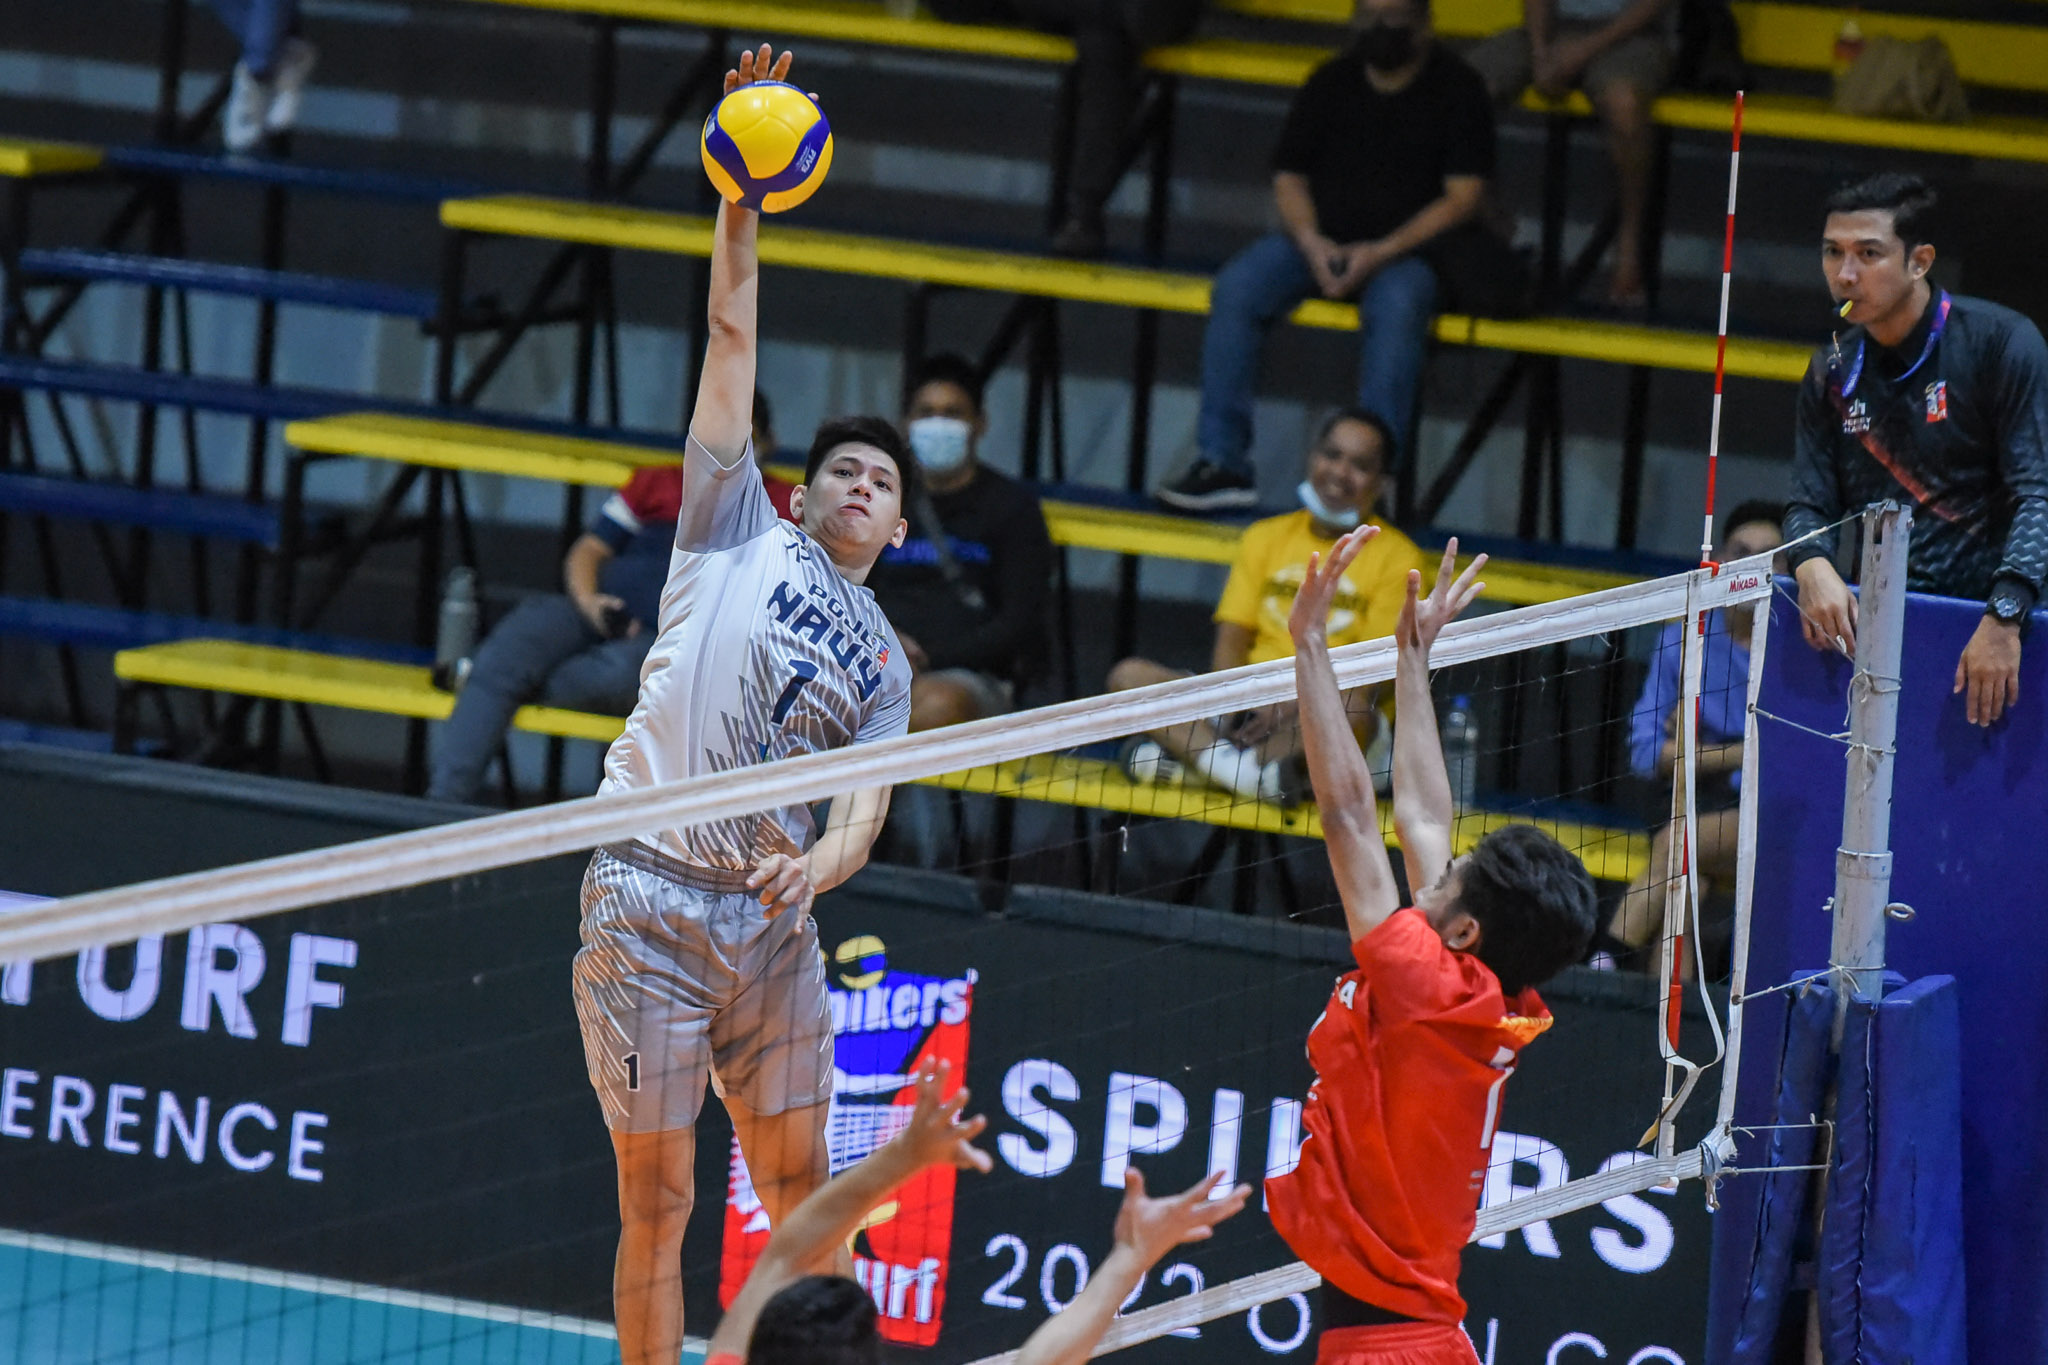 Spikers-Turf-Navy-vs.-Sta-Rosa-Jao-Umandal-1591-1 Umandal reminds Navy to stay guarded as semis gets tricky News Spikers' Turf Volleyball  - philippine sports news